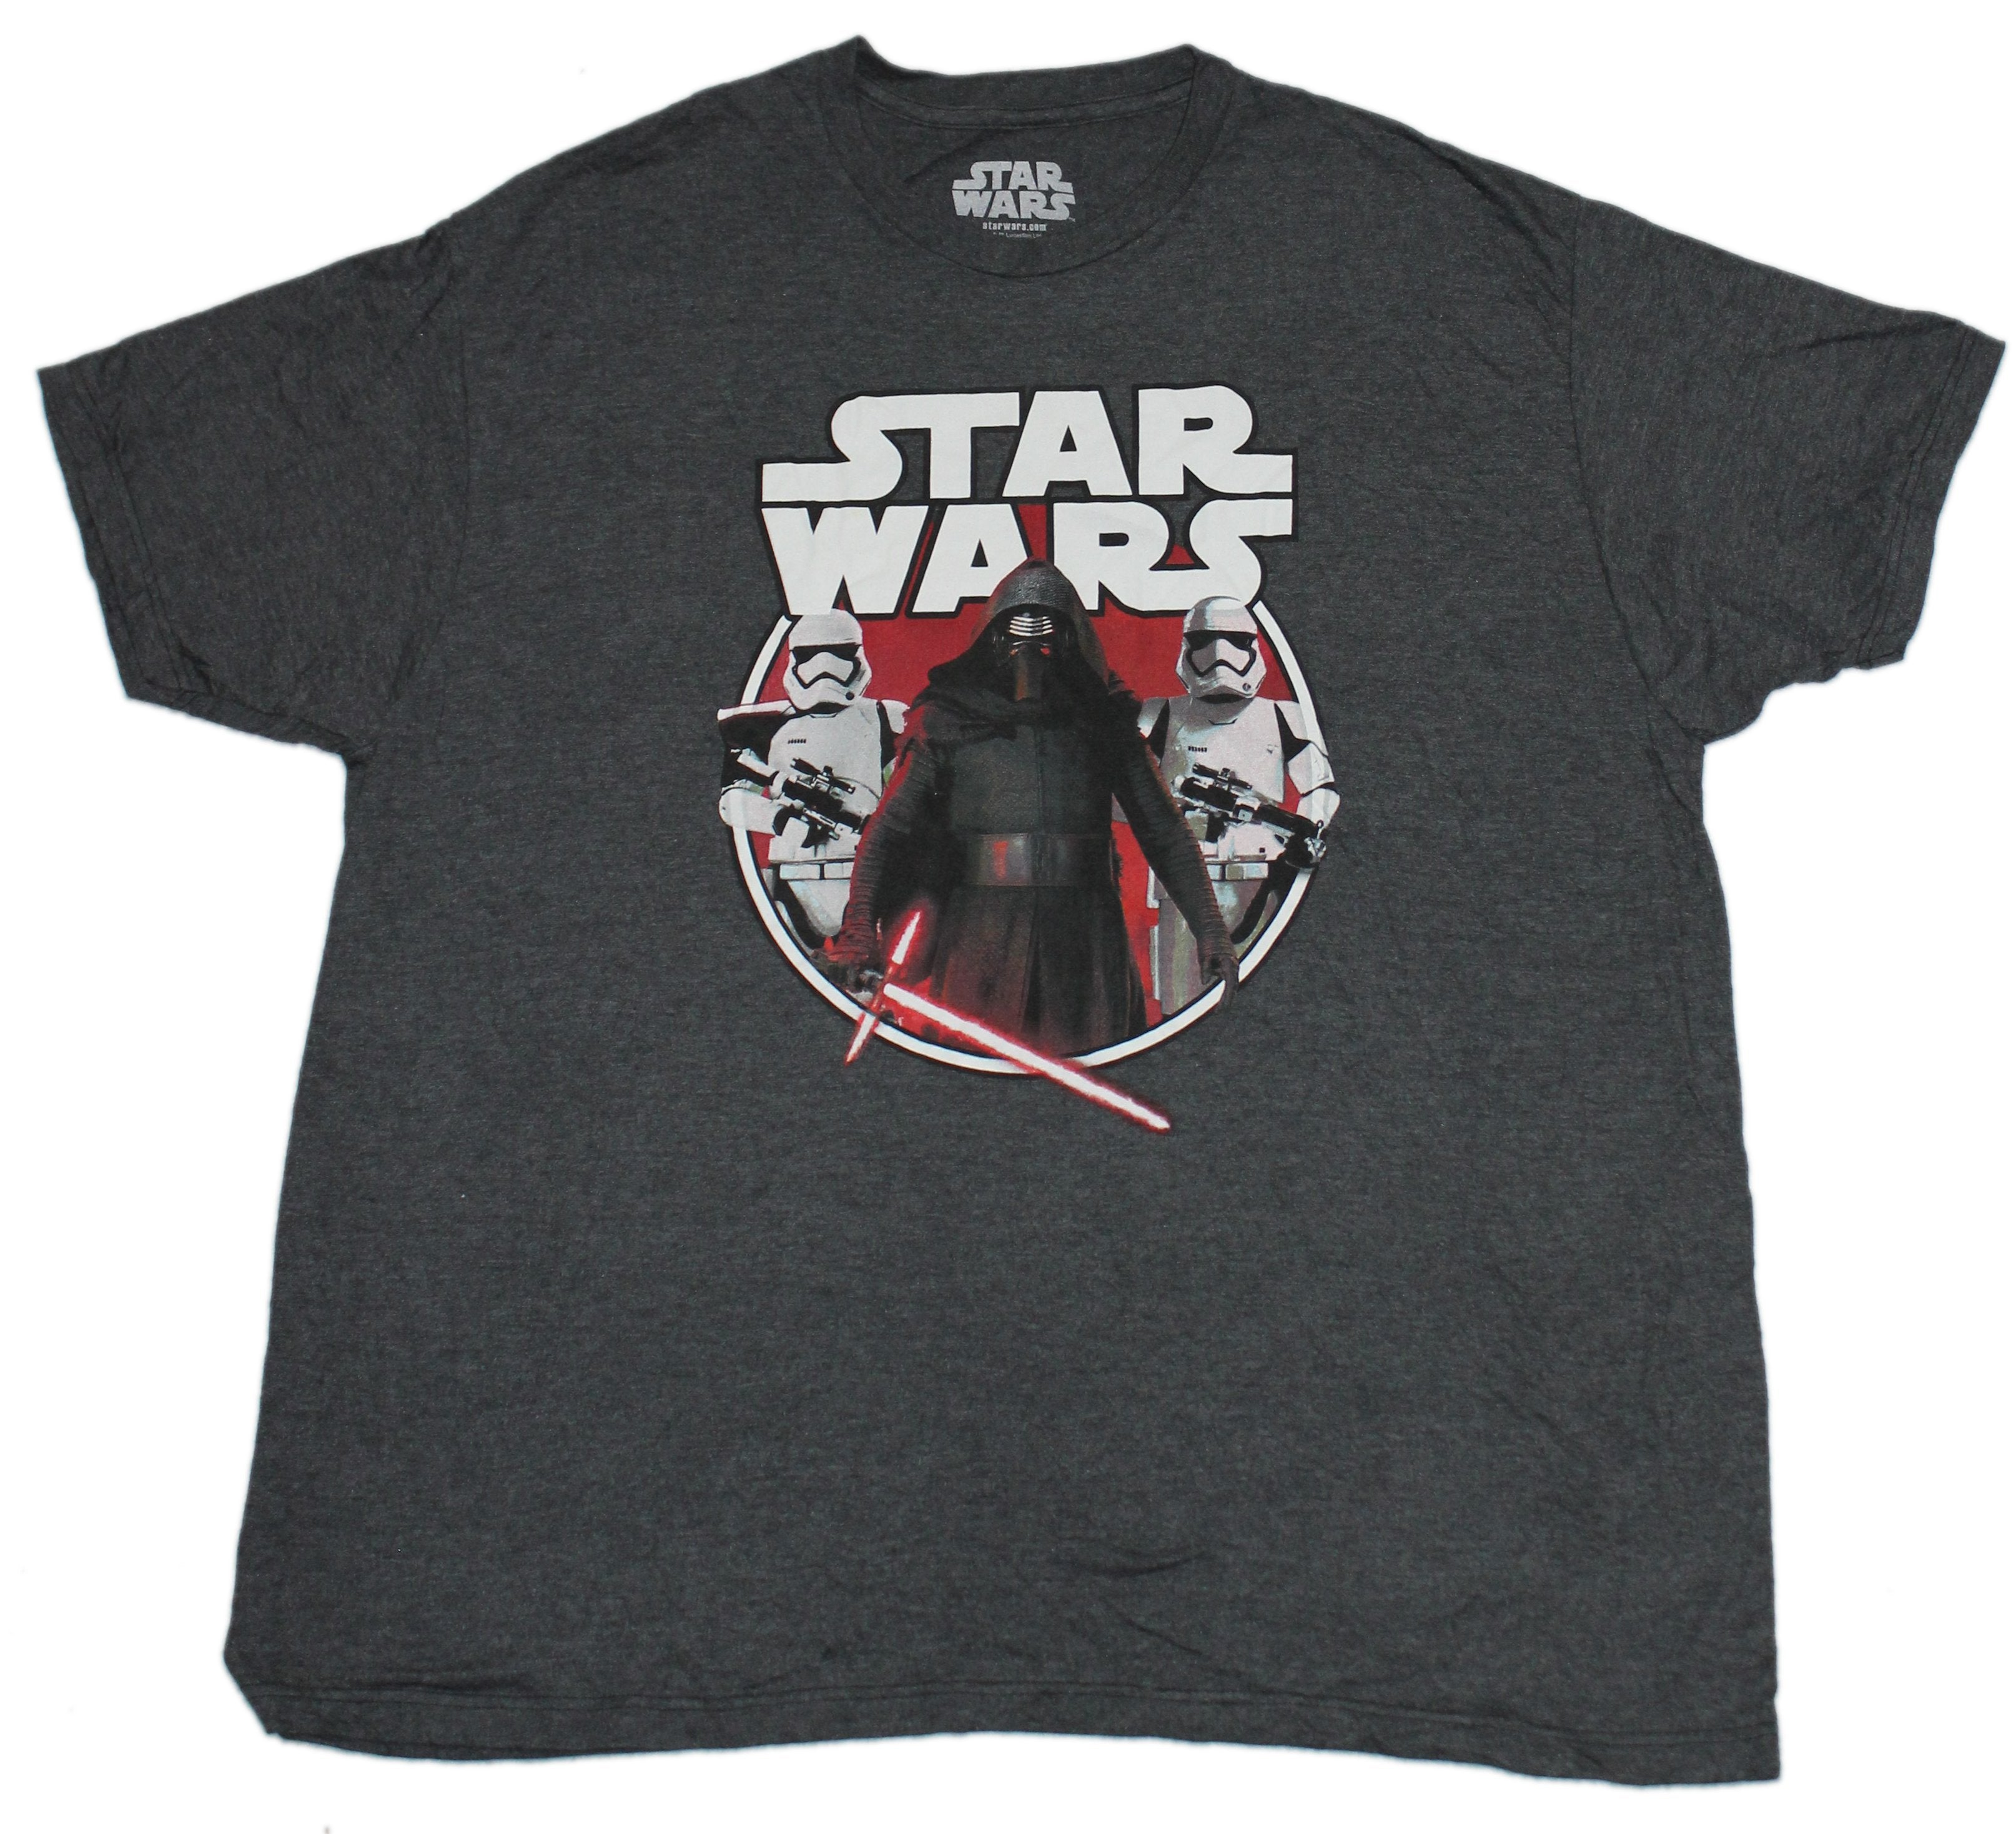 Star Wars Mens T-Shirt - Kylo Ren Escorted by Stormtroopers